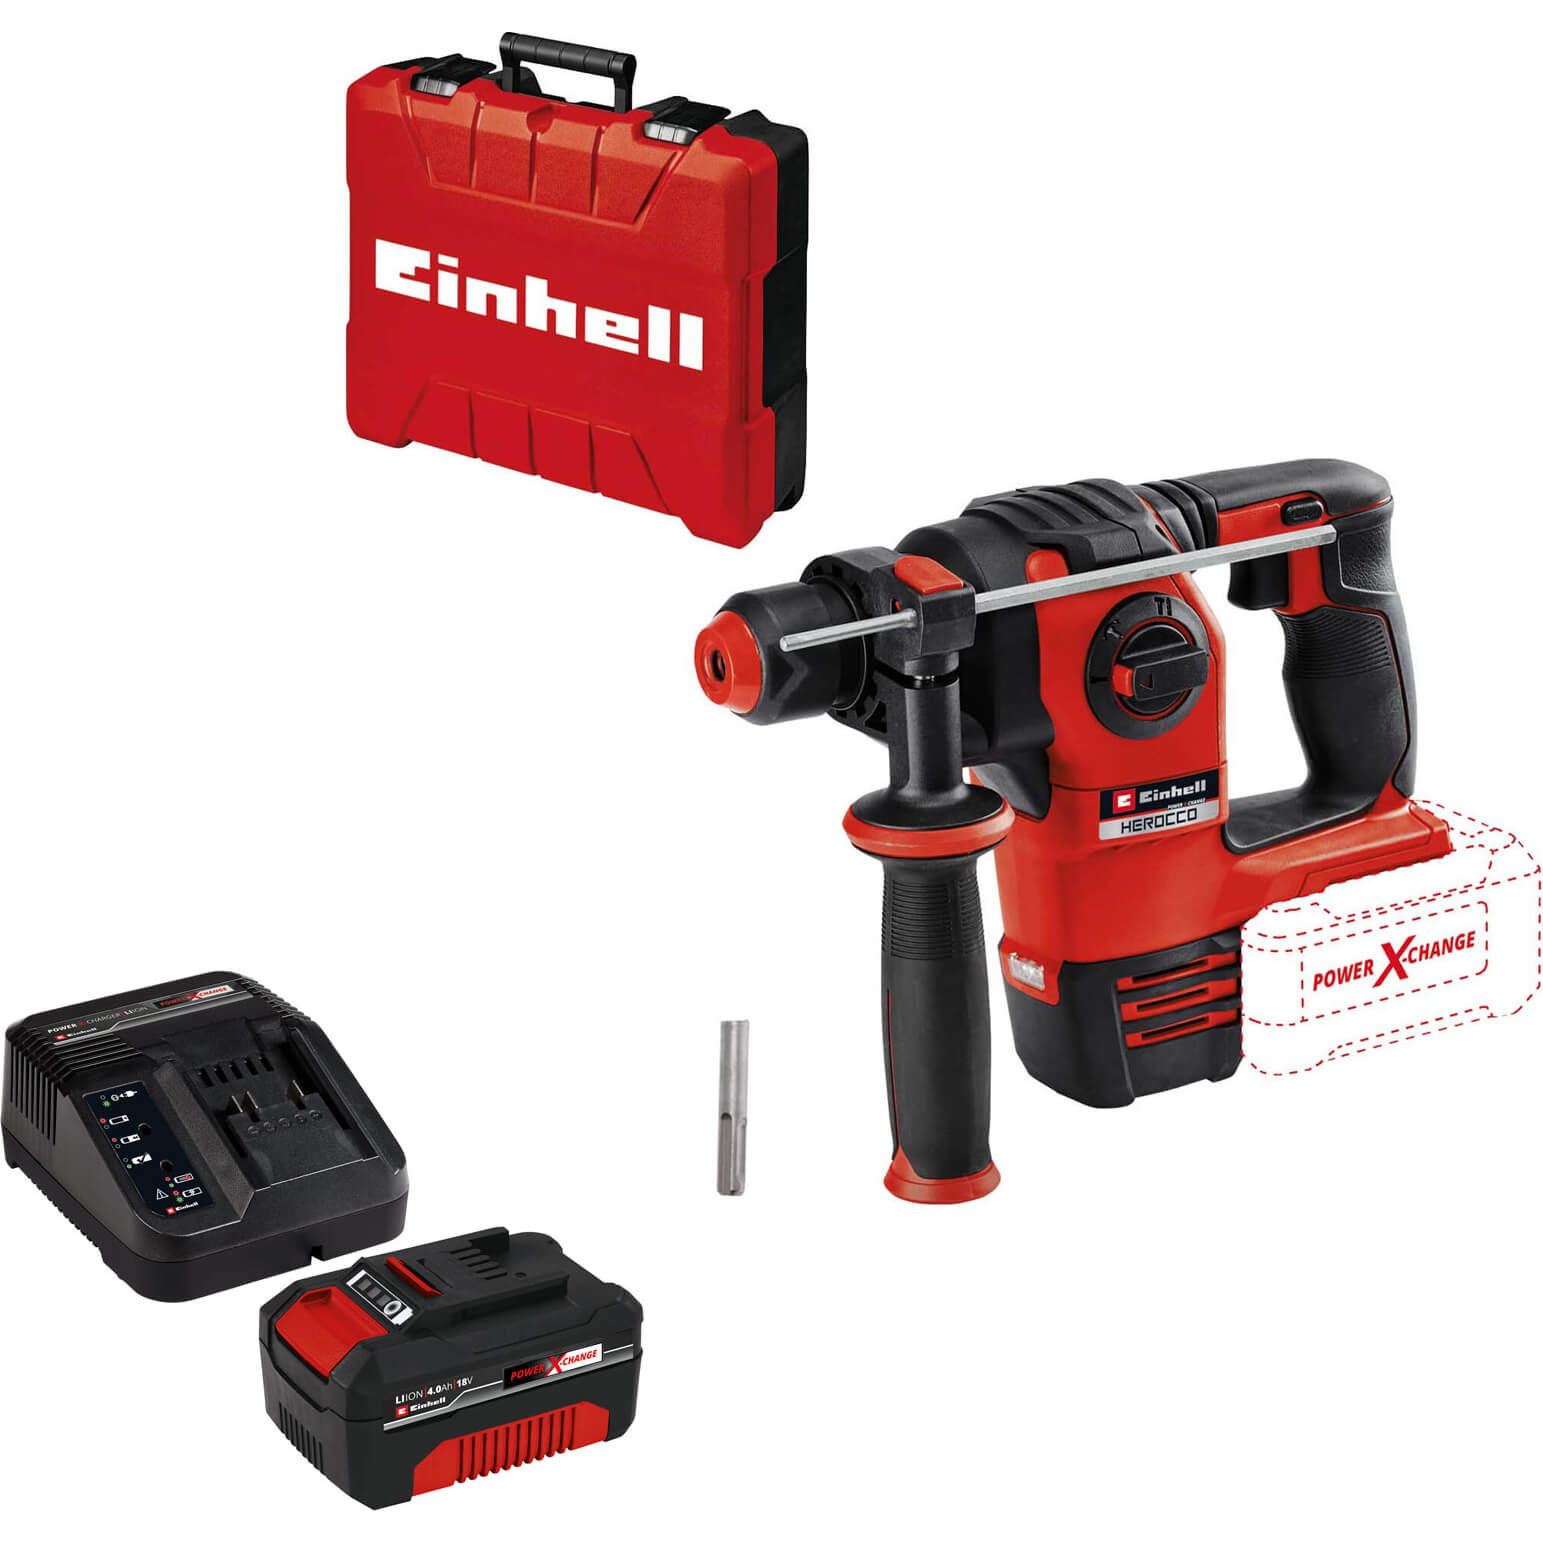 Image of Einhell HEROCCO 18v Cordless Brushless SDS Plus Rotary Hammer Drill 1 x 4ah Li-ion Charger Case